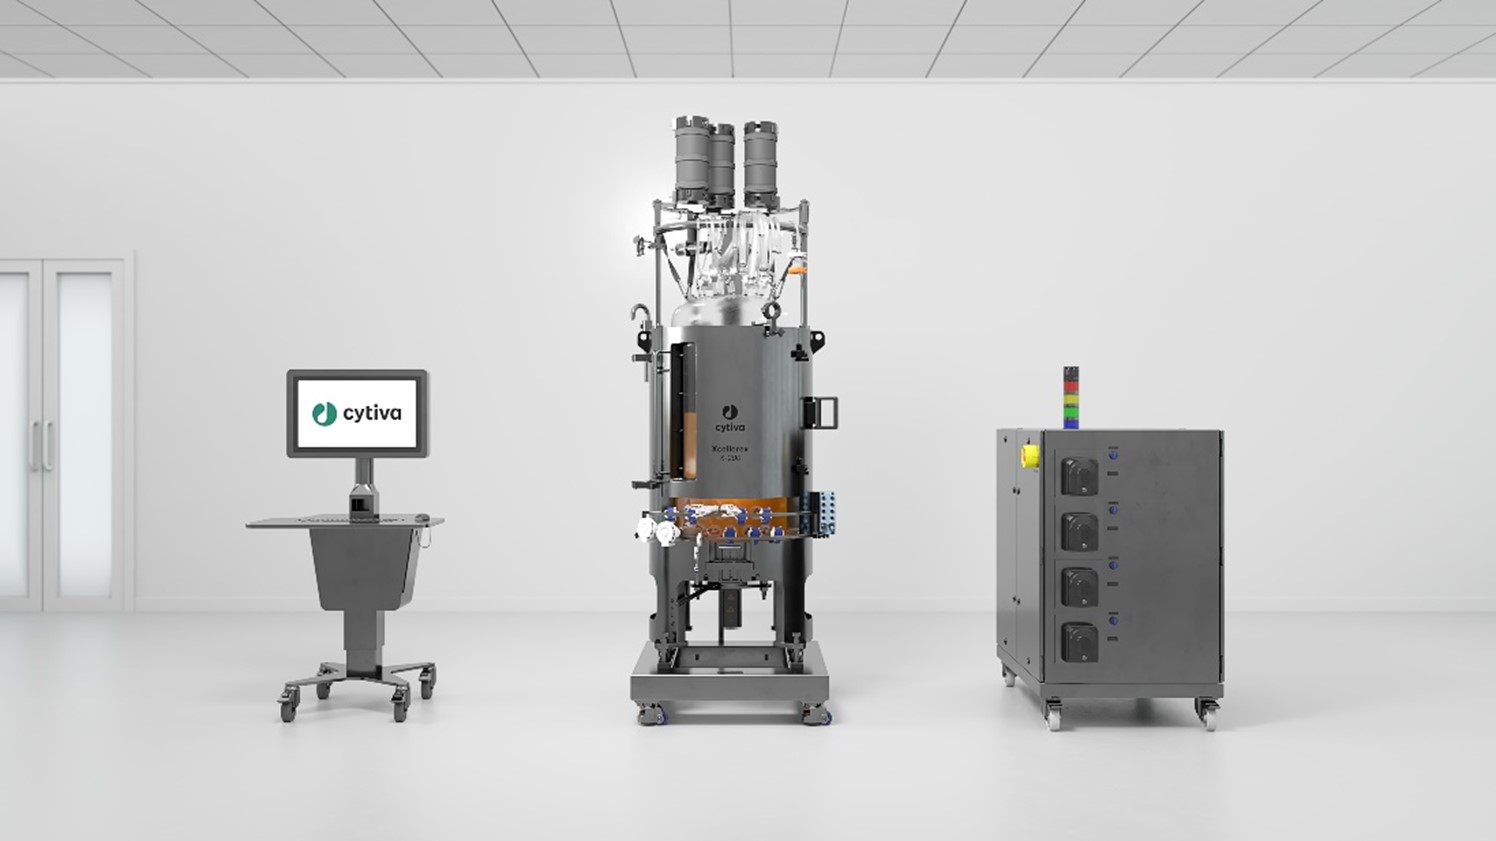 Above: Cytiva launches X-platform bioreactors to simplify single-use upstream bioprocessing operations.